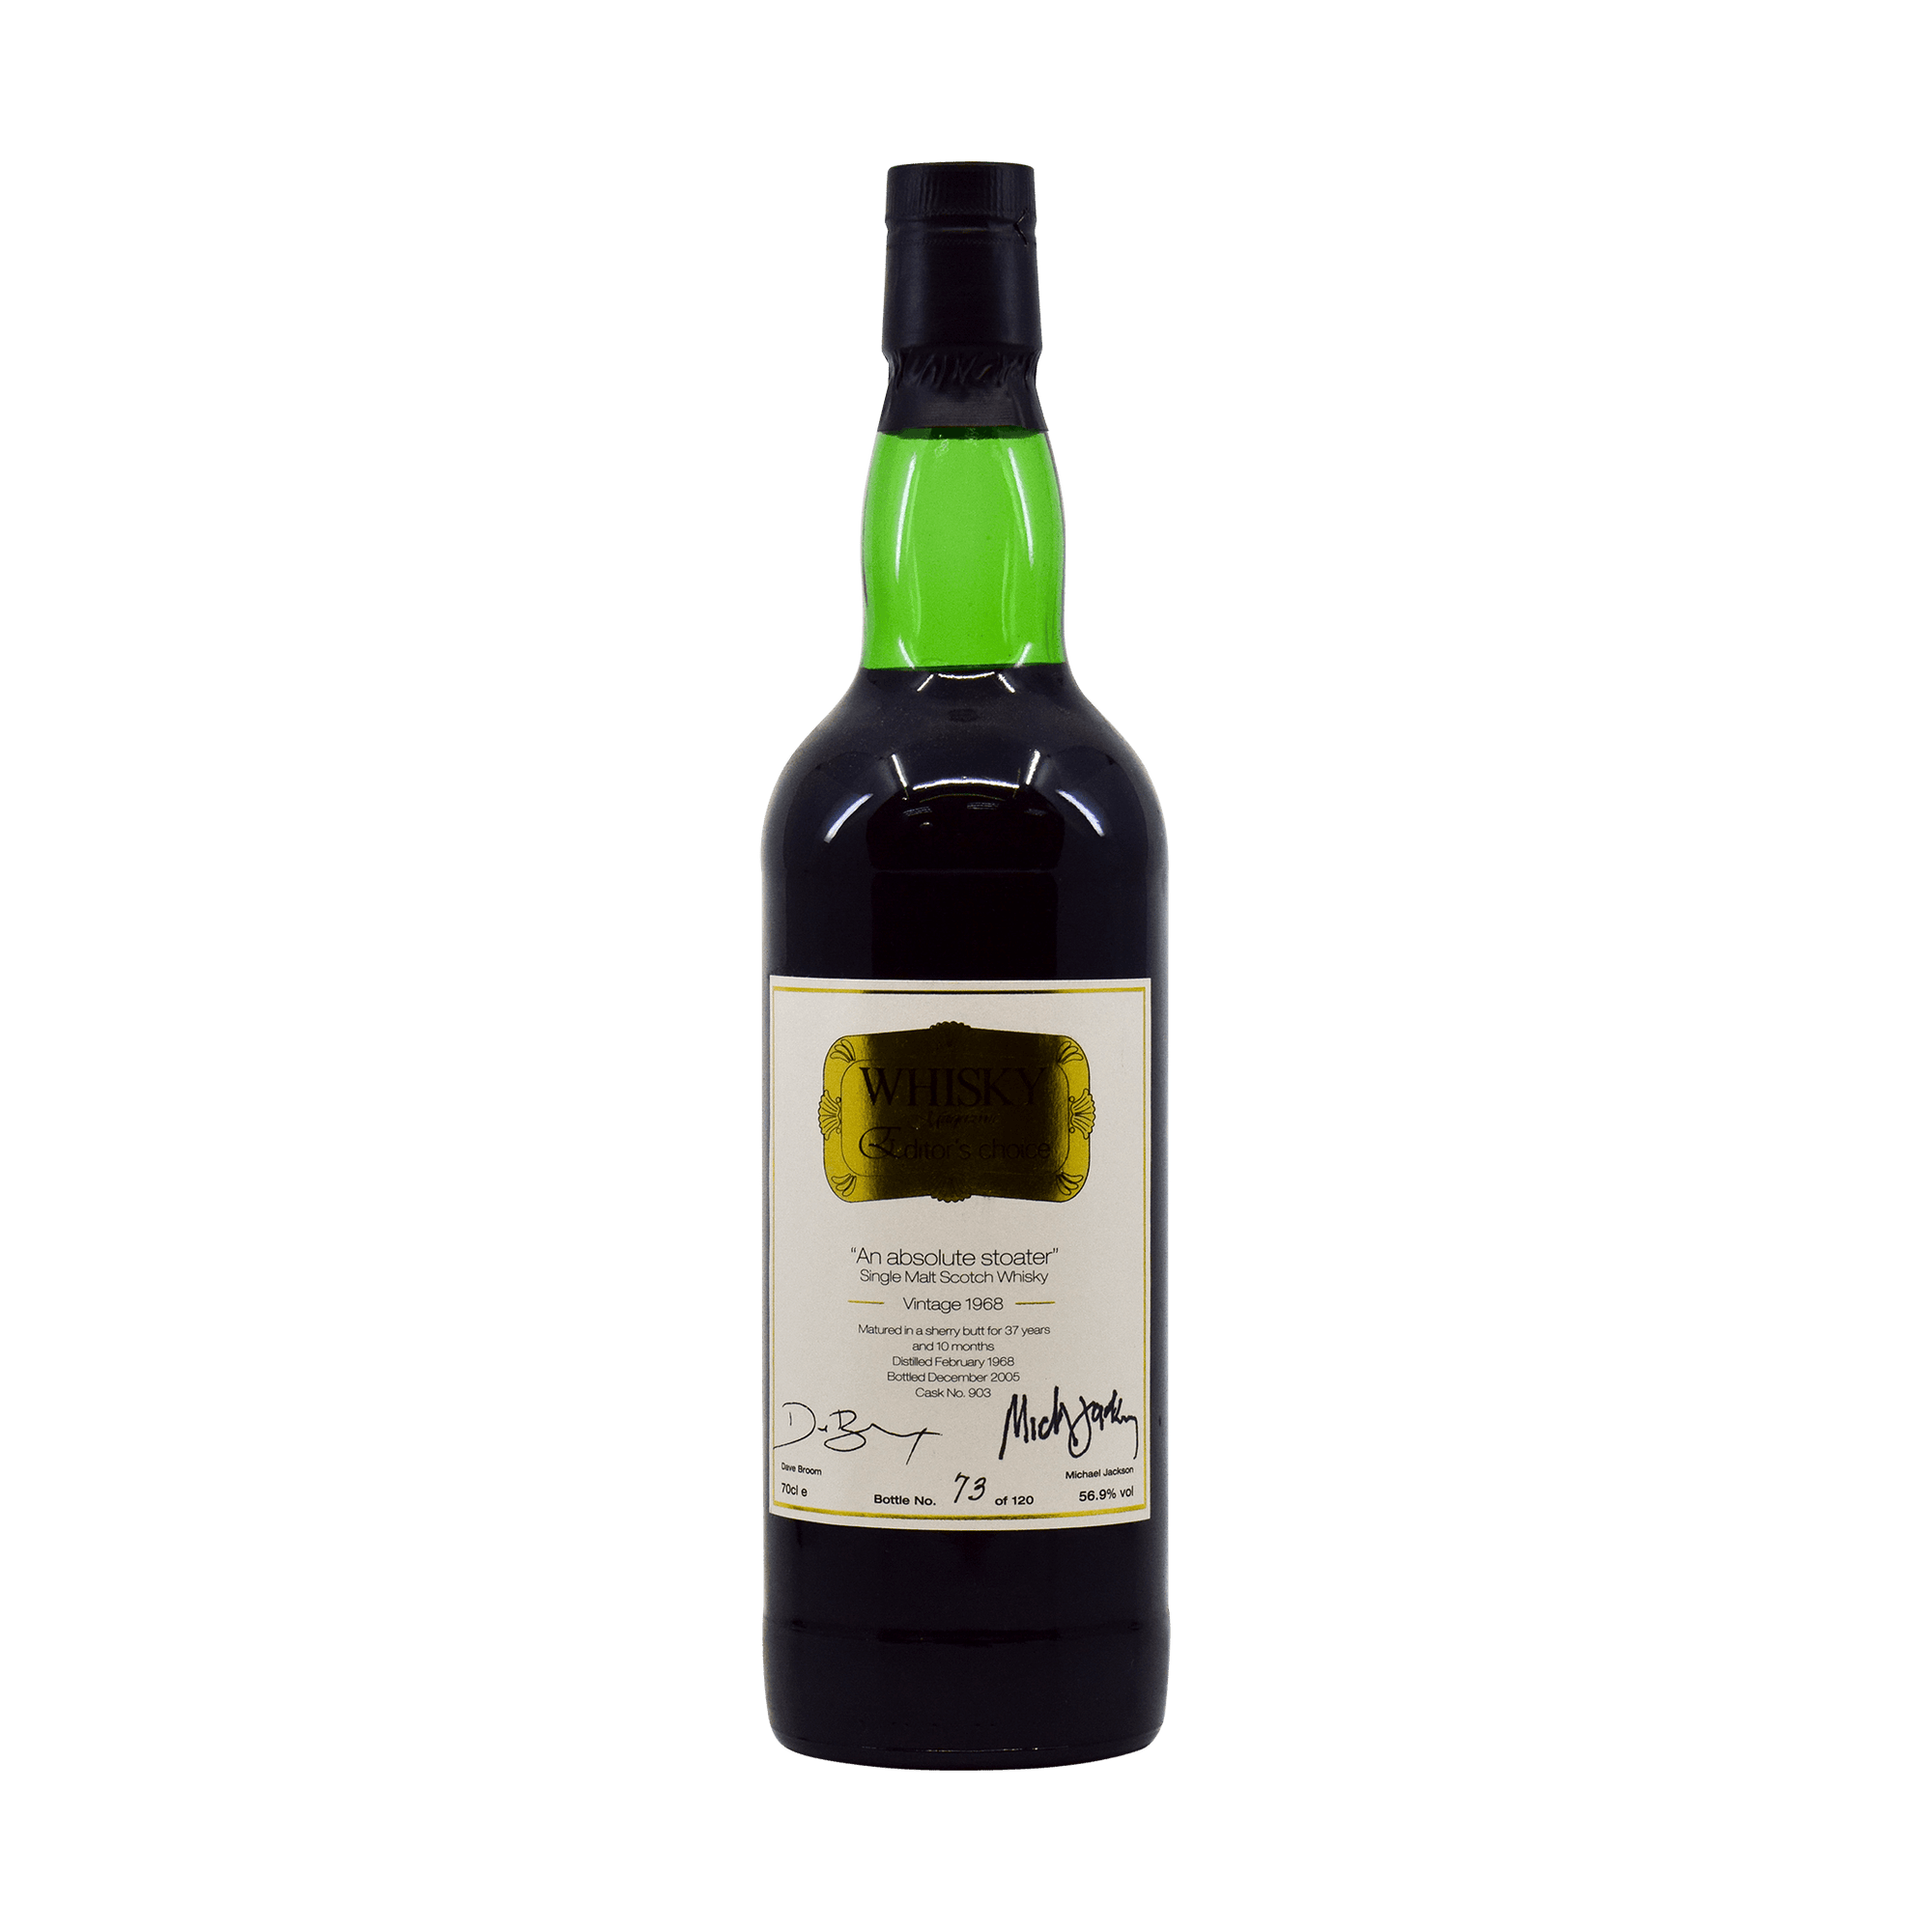 Longmorn 1968 37 Year Old 'An Absolute Stoater' SMWS 56.90% 70cl